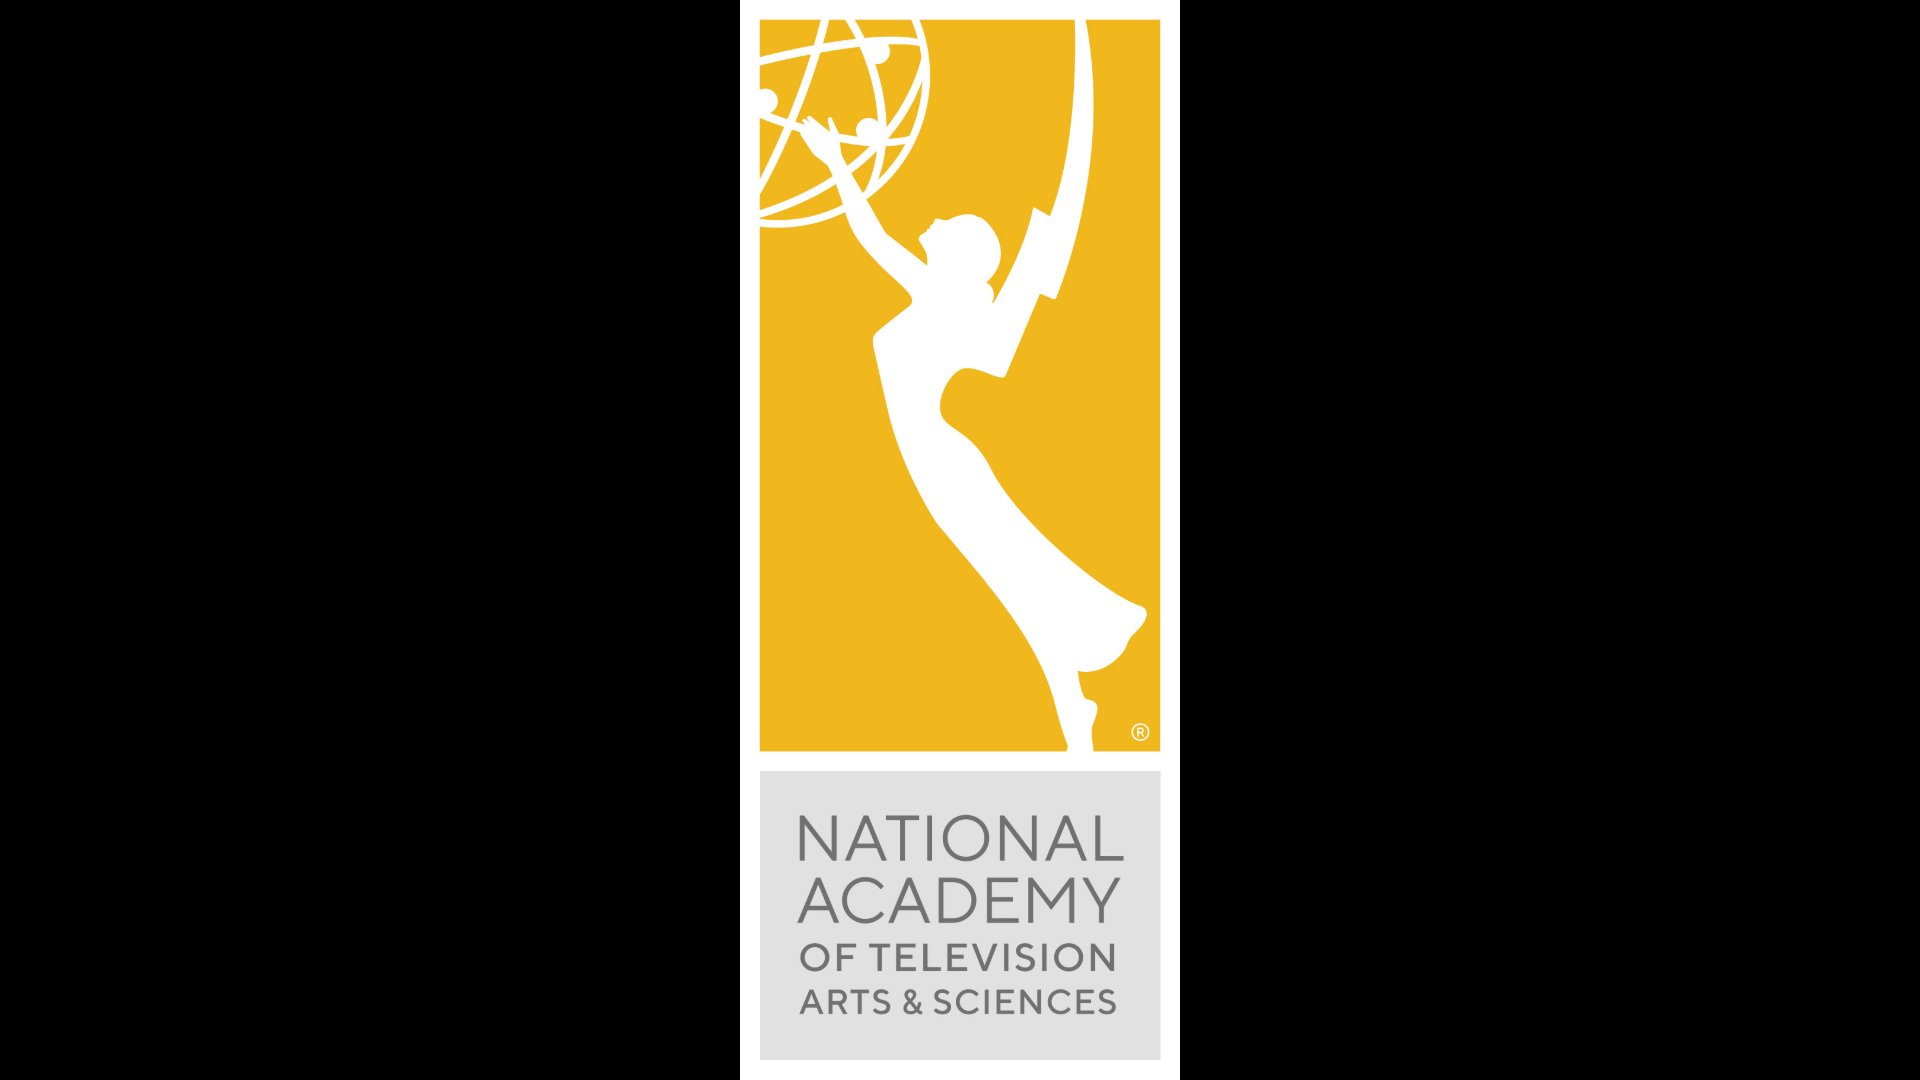 NATIONAL ACADEMY OF TELEVISION ARTS & SCIENCES